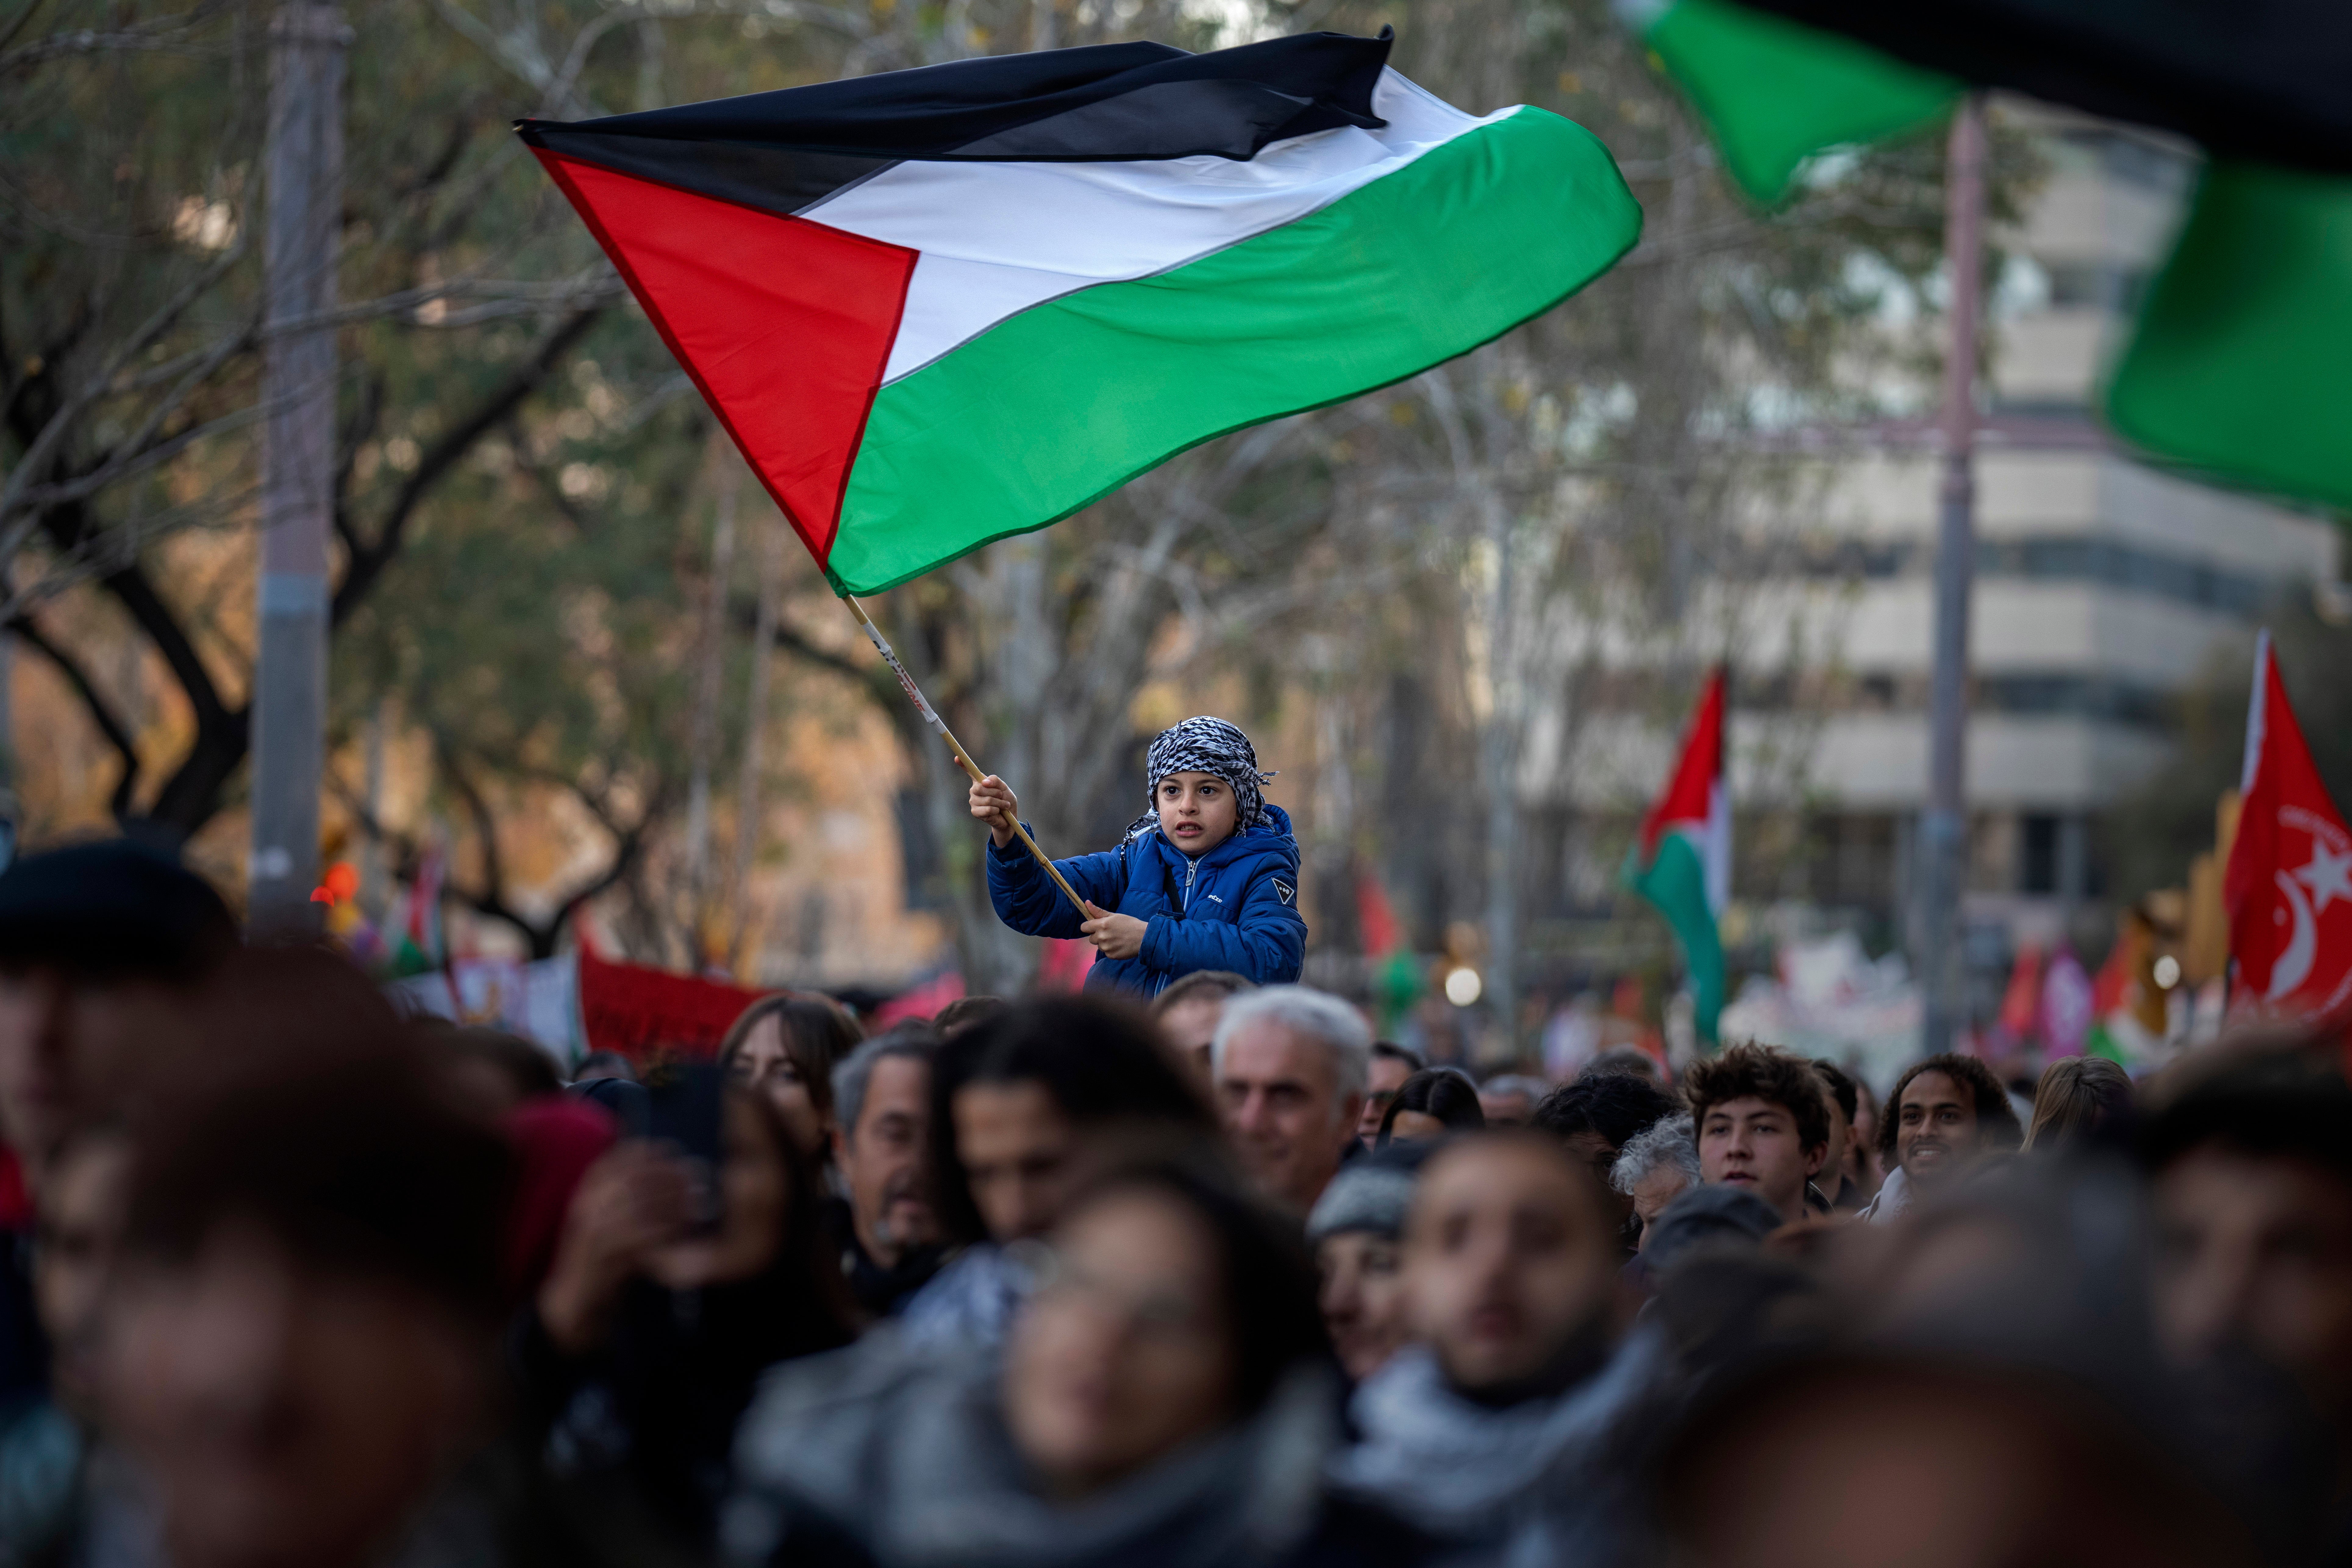 A boy waves a Palestinian flag as demonstrators march in Barcelona, Spain